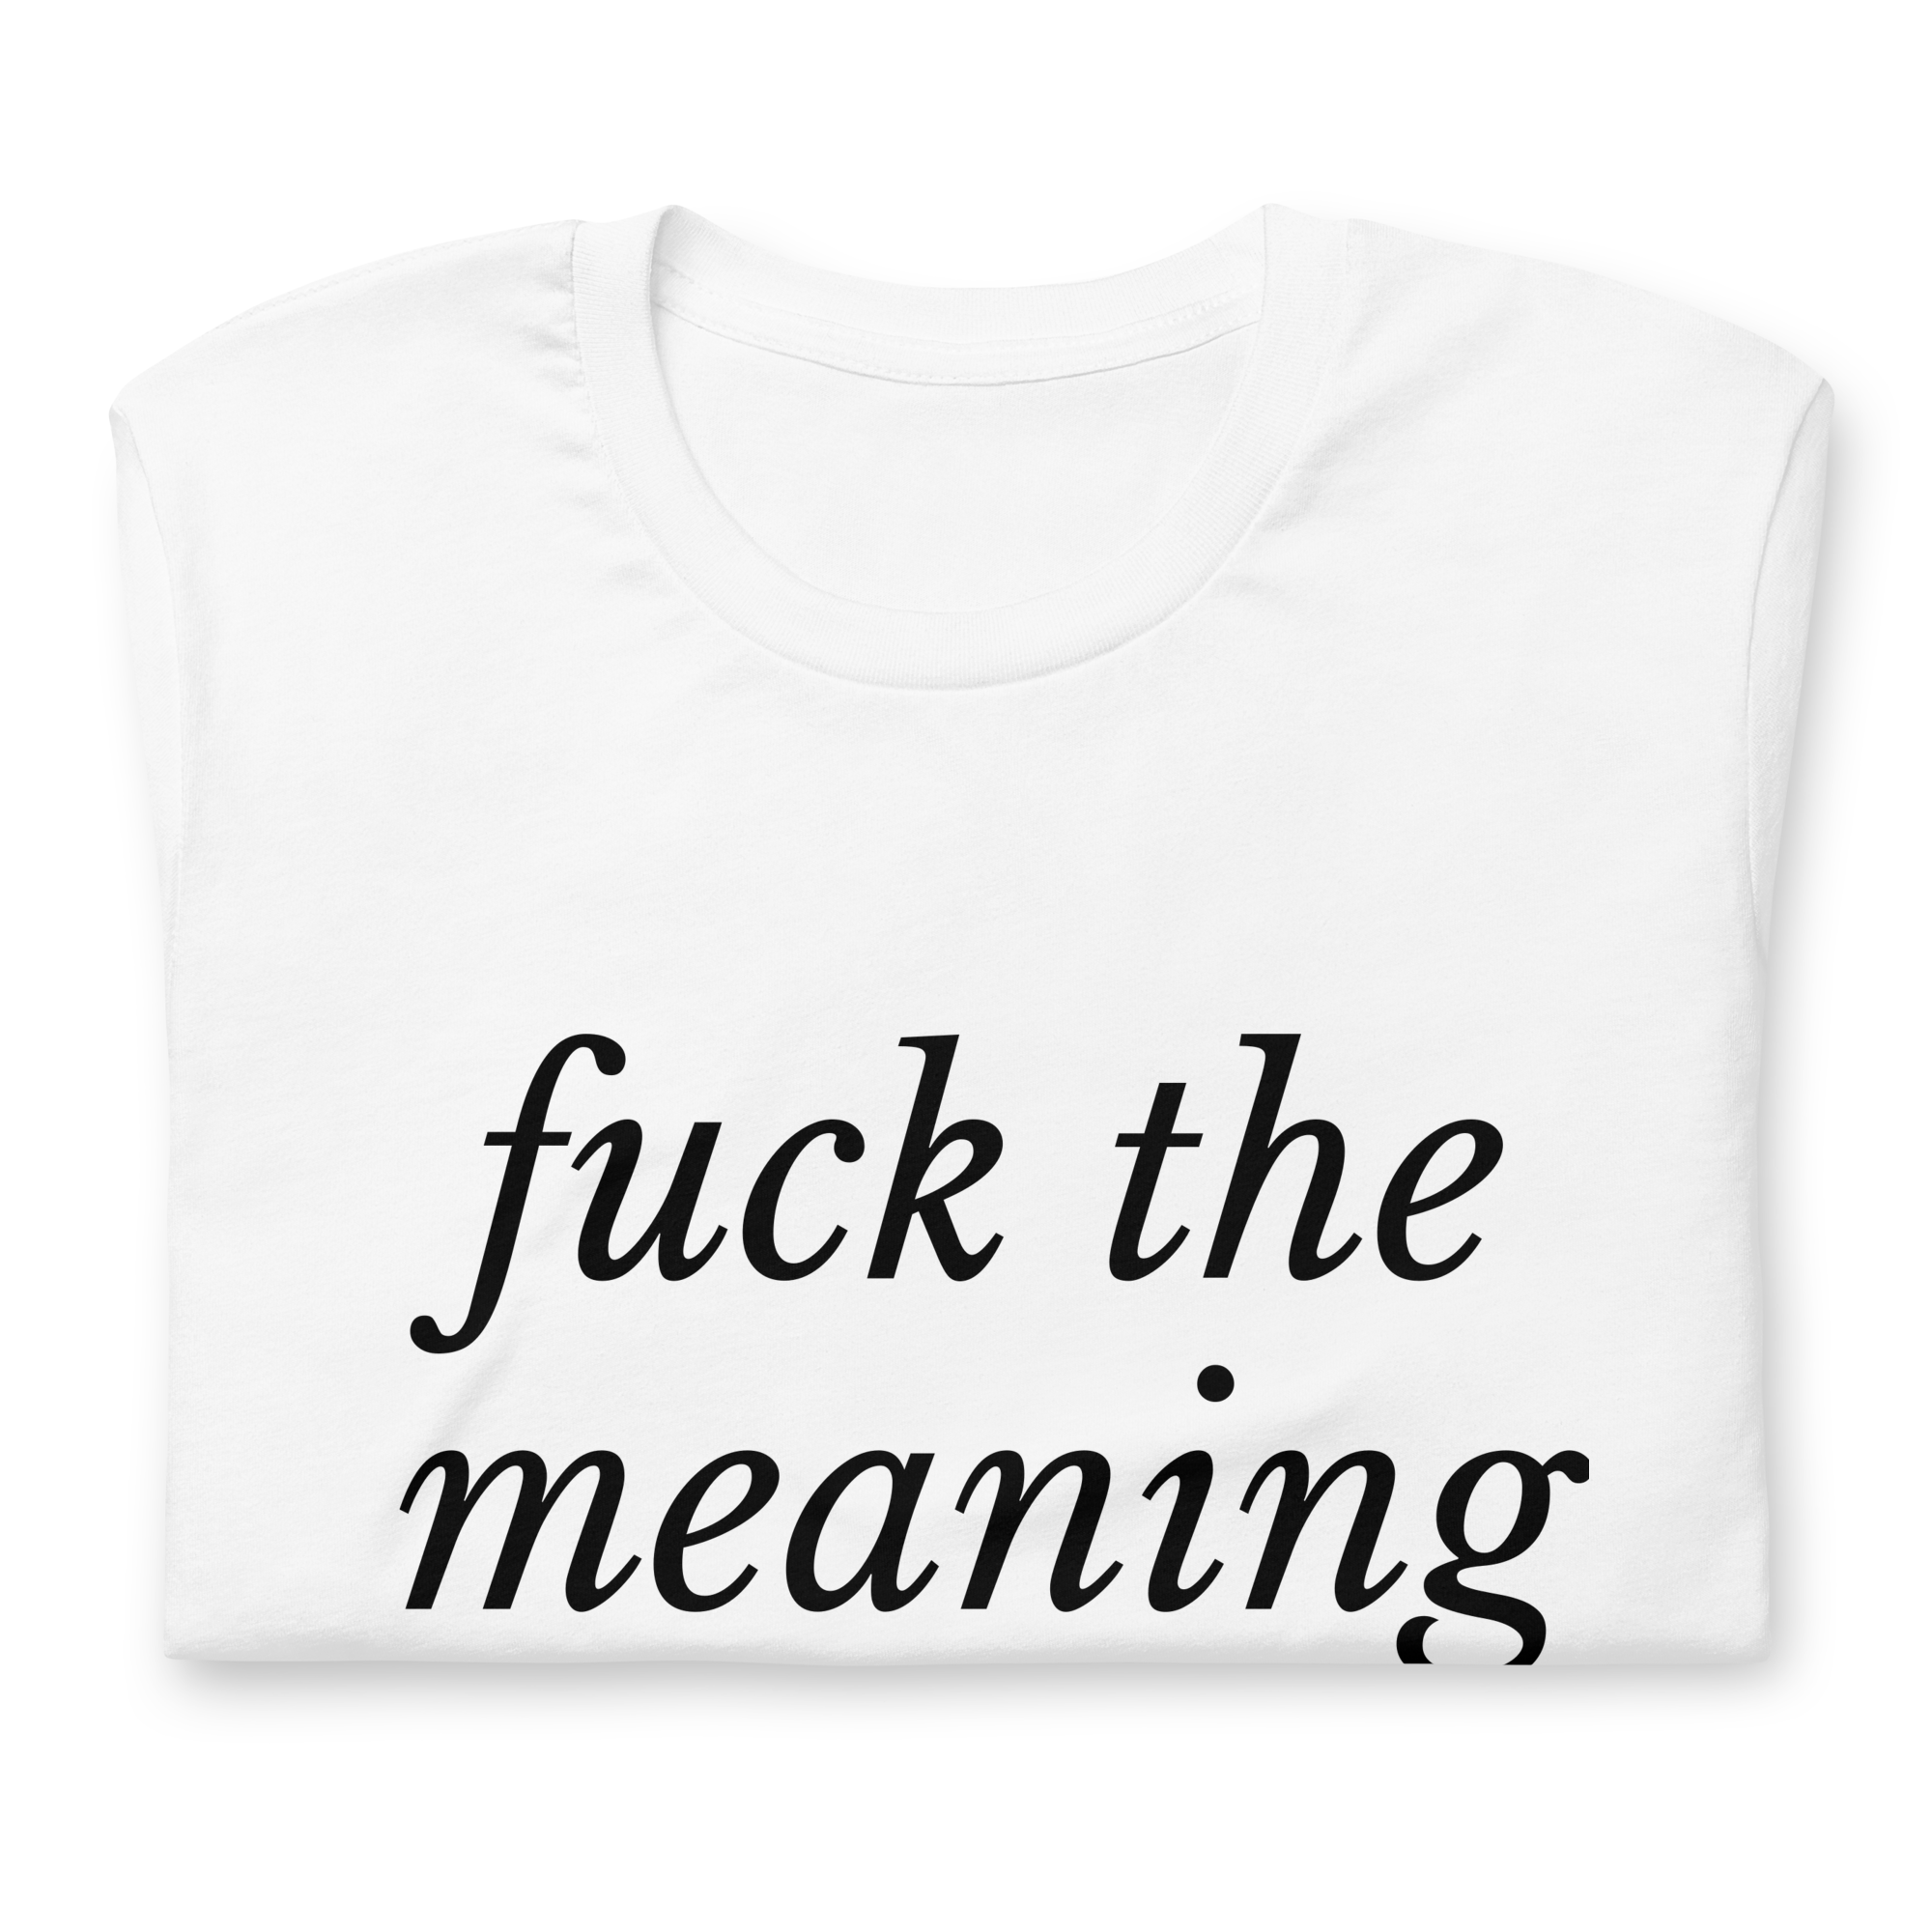 MEANING OF LIFE® Unisex t-shirt